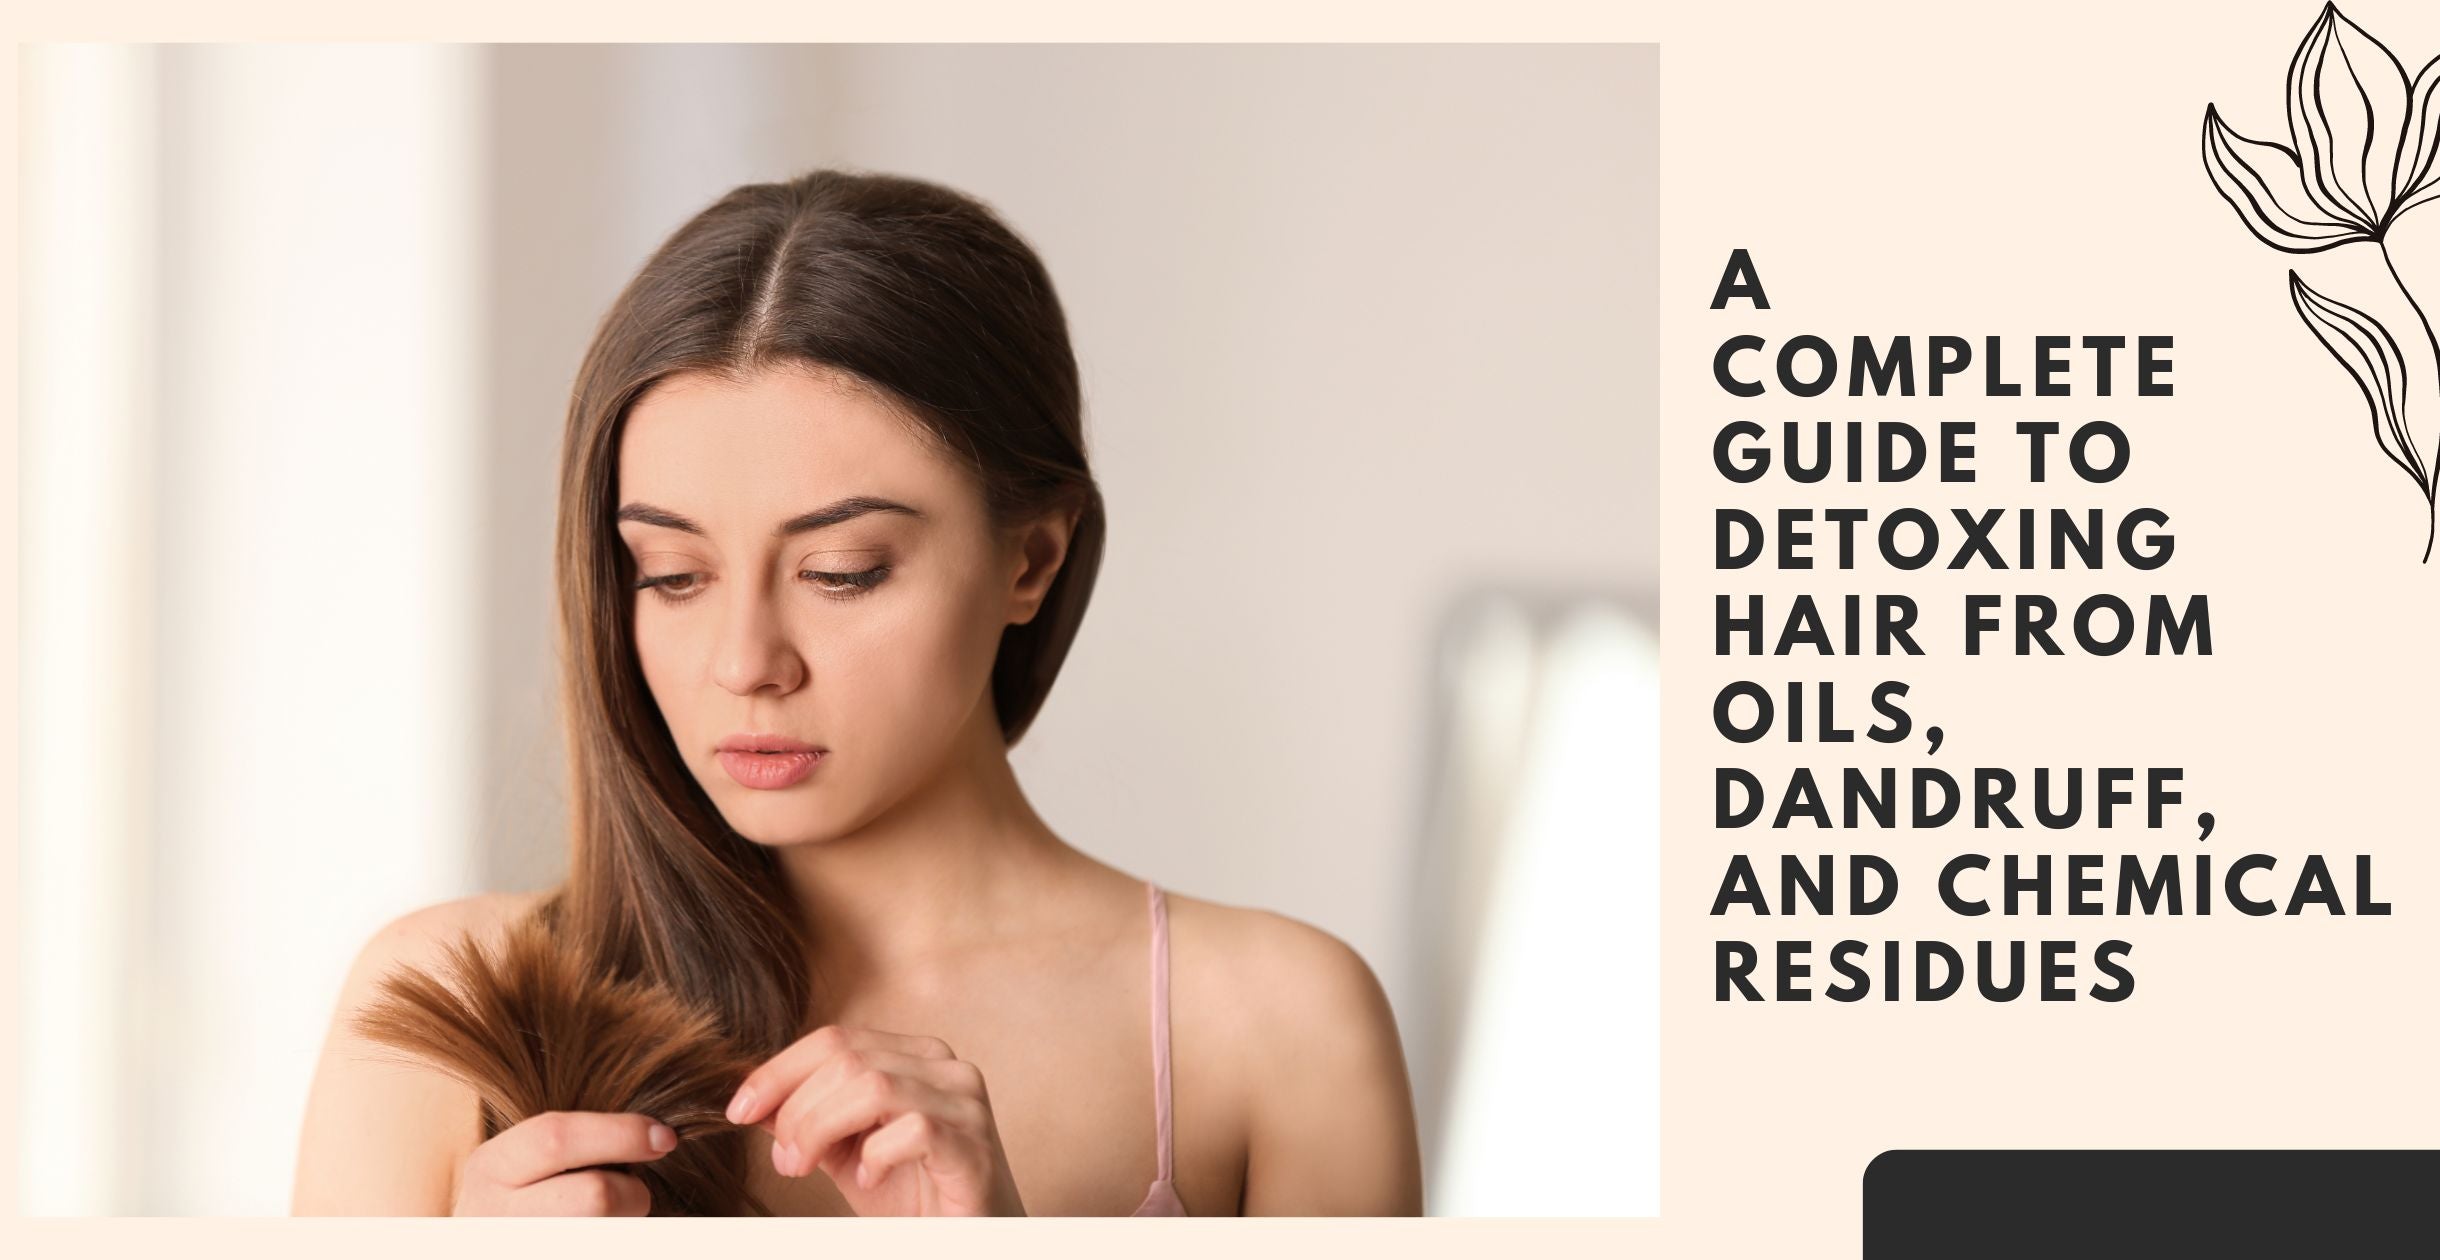 A Complete Guide to Detoxing Hair from Oils, Dandruff, and Chemical Residues